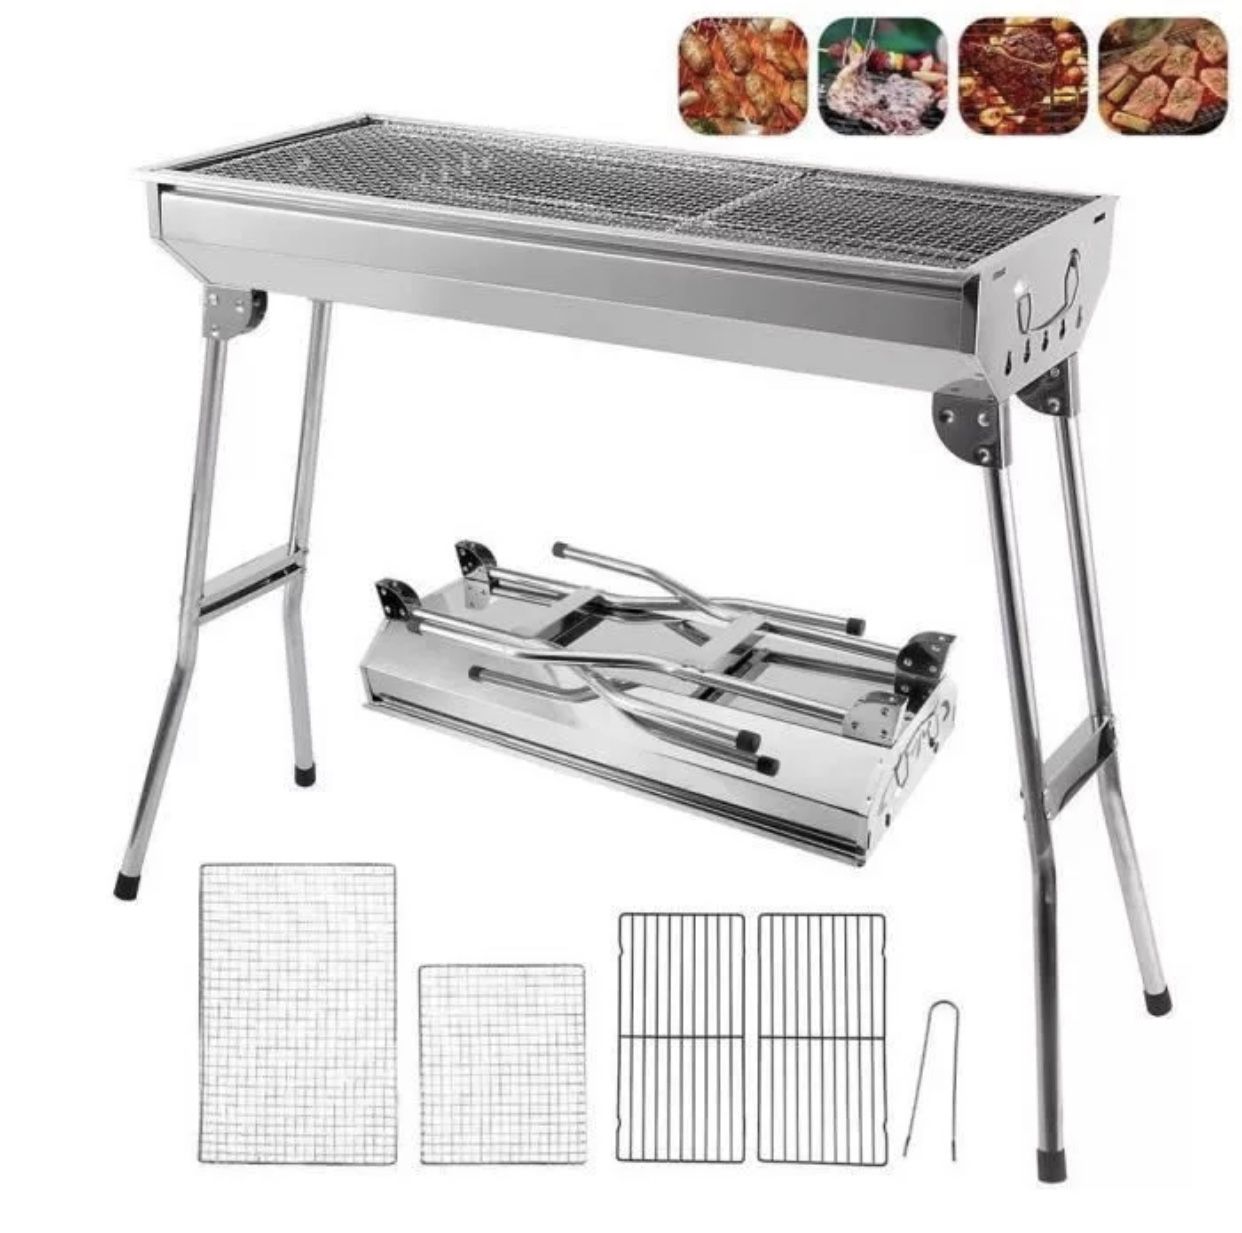 BBQ Grill Outdoor Stainless Steel Charcoal Grill BBQ Tool Portable Free Installation Handle Folding BBQ Cooking Grid Garden